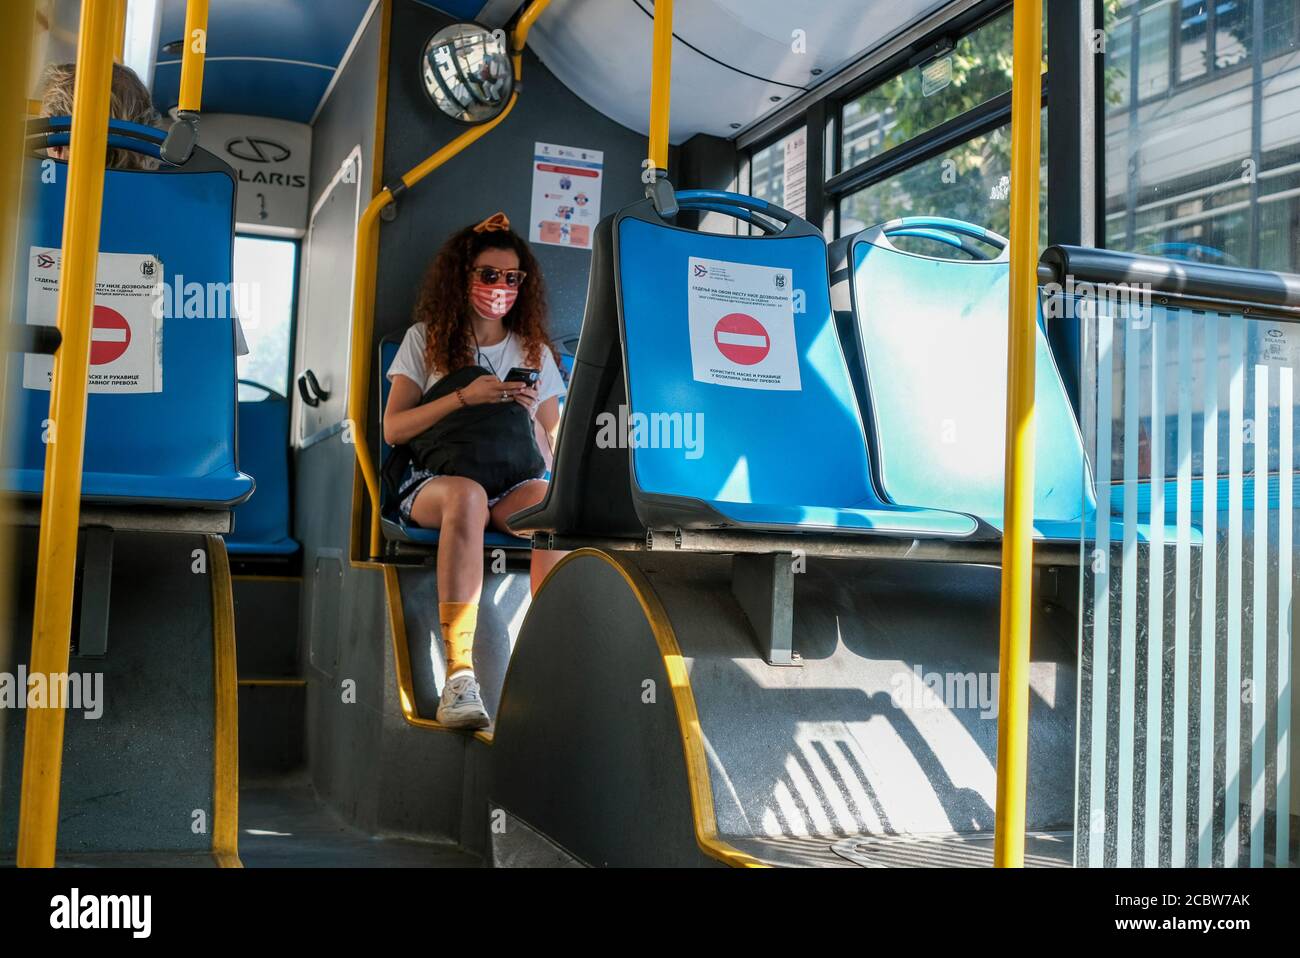 Belgrade / Serbia - August 8, 2020: Young girl wearing a medical face mask on Belgrade city public bus with posters warning to keep social distance on Stock Photo